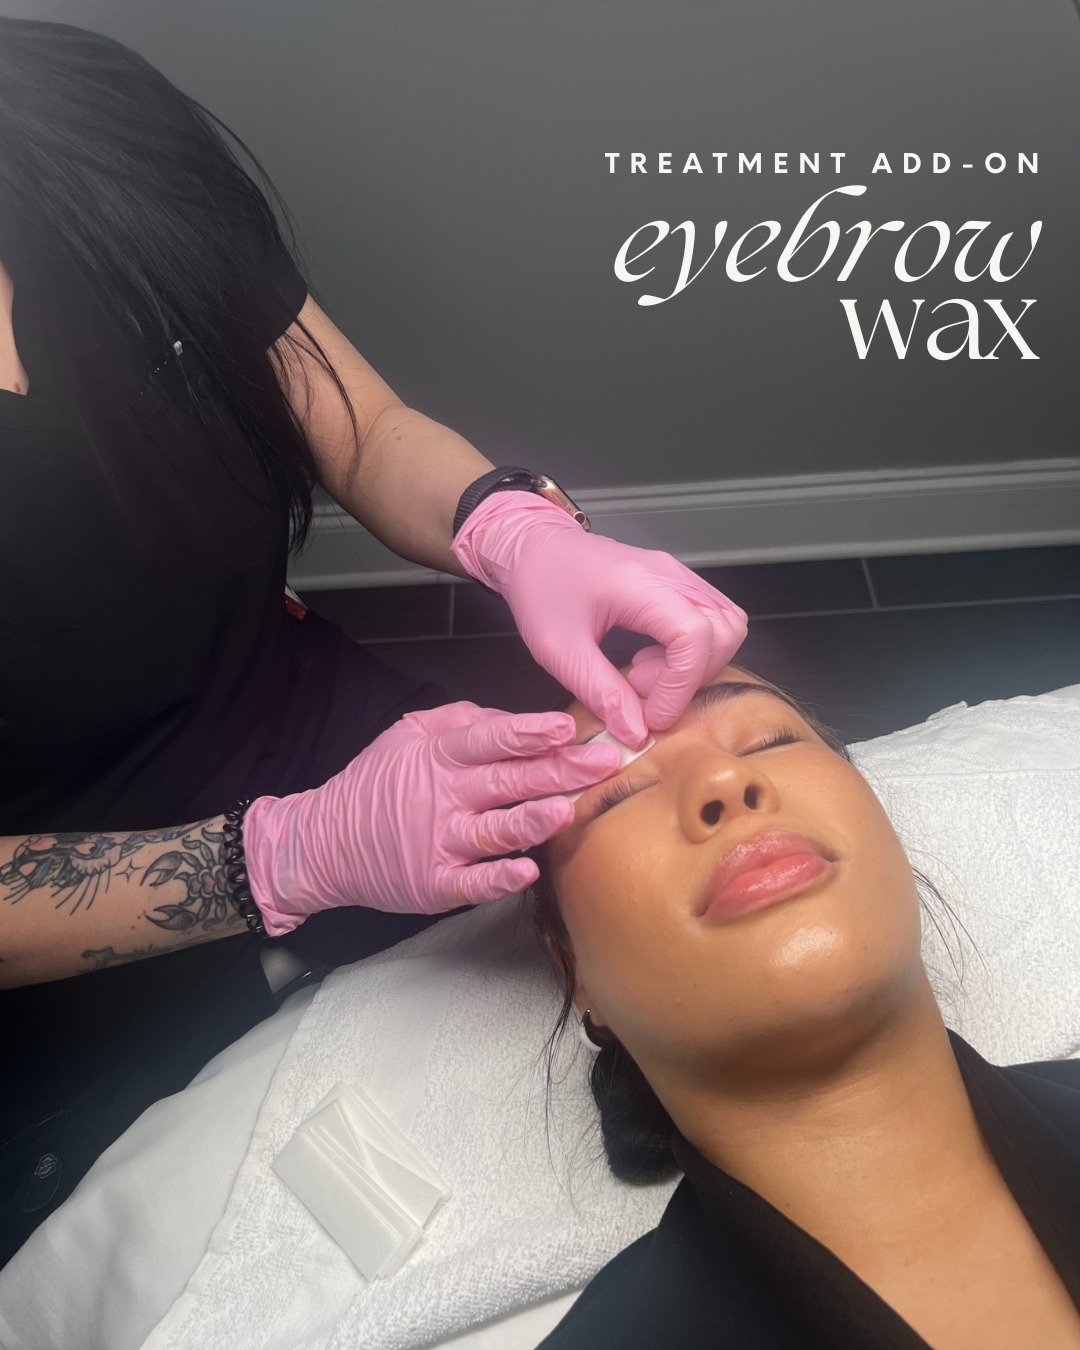 no need to book seperate appointments, we make it easy for you - add an eyebrow wax to your next appointment! 

*subject to type of treatment received, waxing not suggested for some treatments. be sure to ask your aesthetician for more information.*
